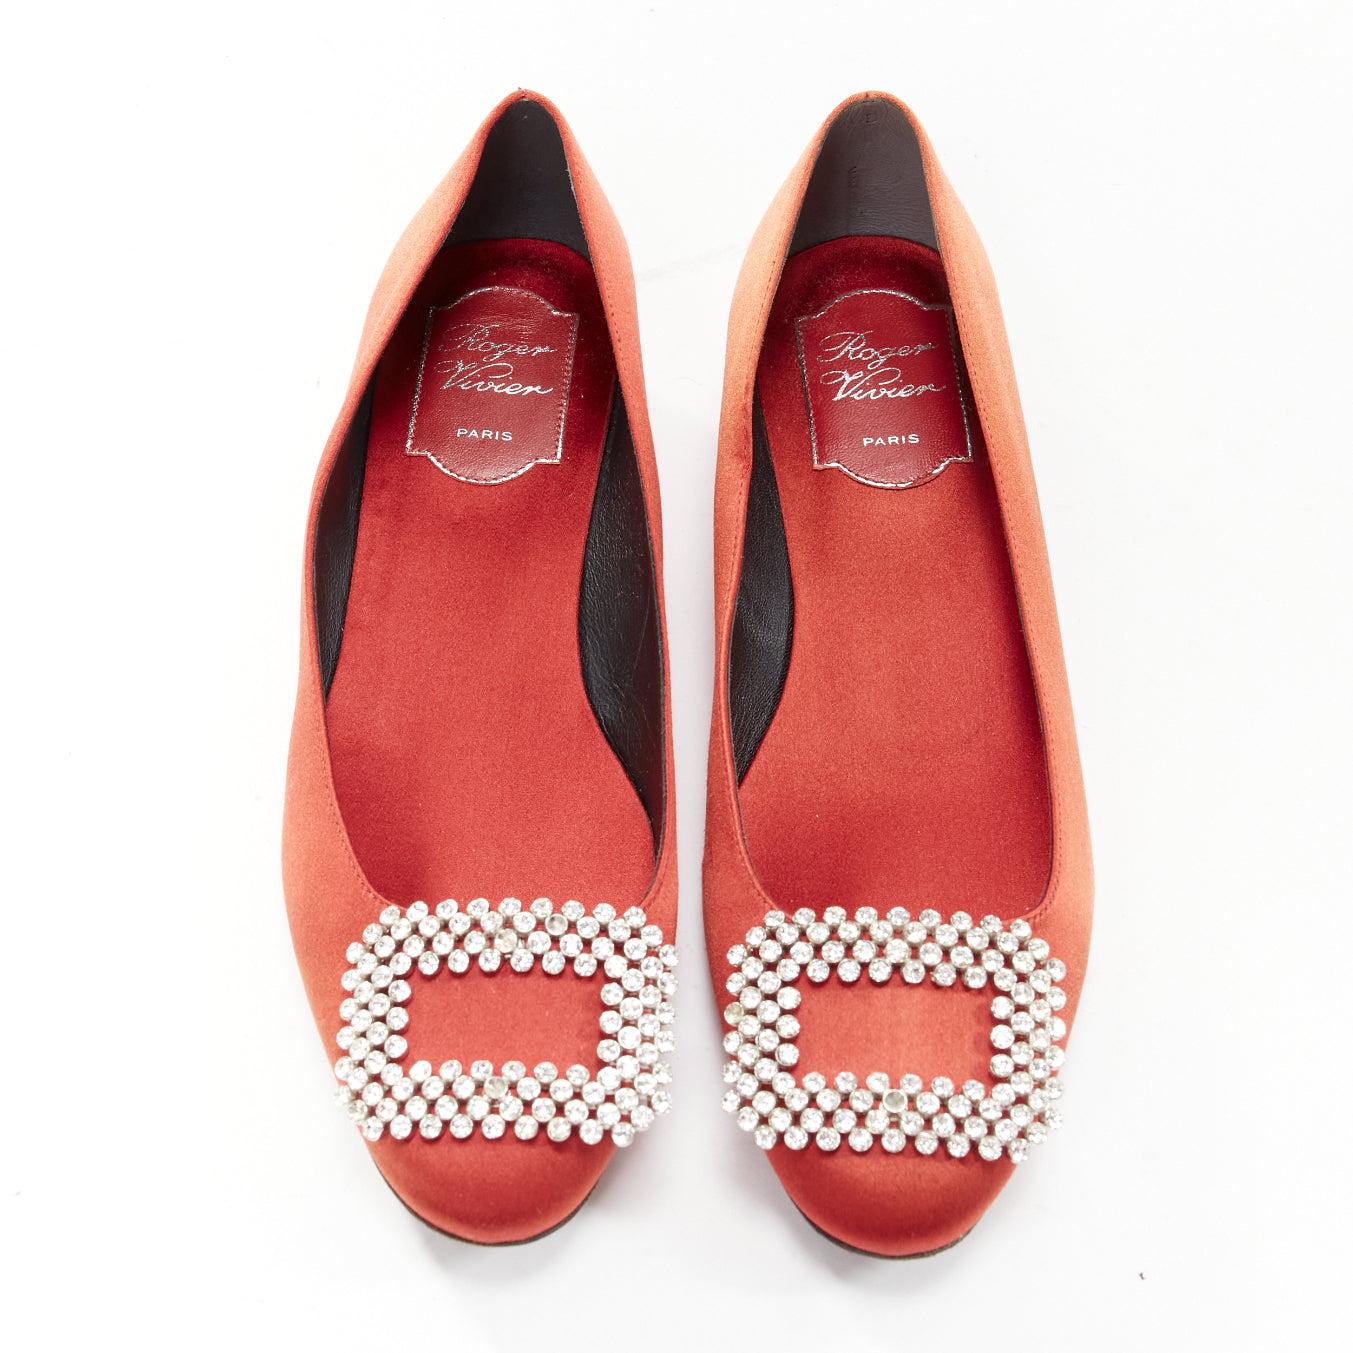 ROGER VIVIER red satin silver strass crystal buckle classic dress flats EU36.5
Reference: KYCG/A00042
Brand: Roger Vivier
Material: Satin
Color: Red
Pattern: Solid
Closure: Slip On
Lining: Red Fabric
Made in: Italy

CONDITION:
Condition: Poor, this